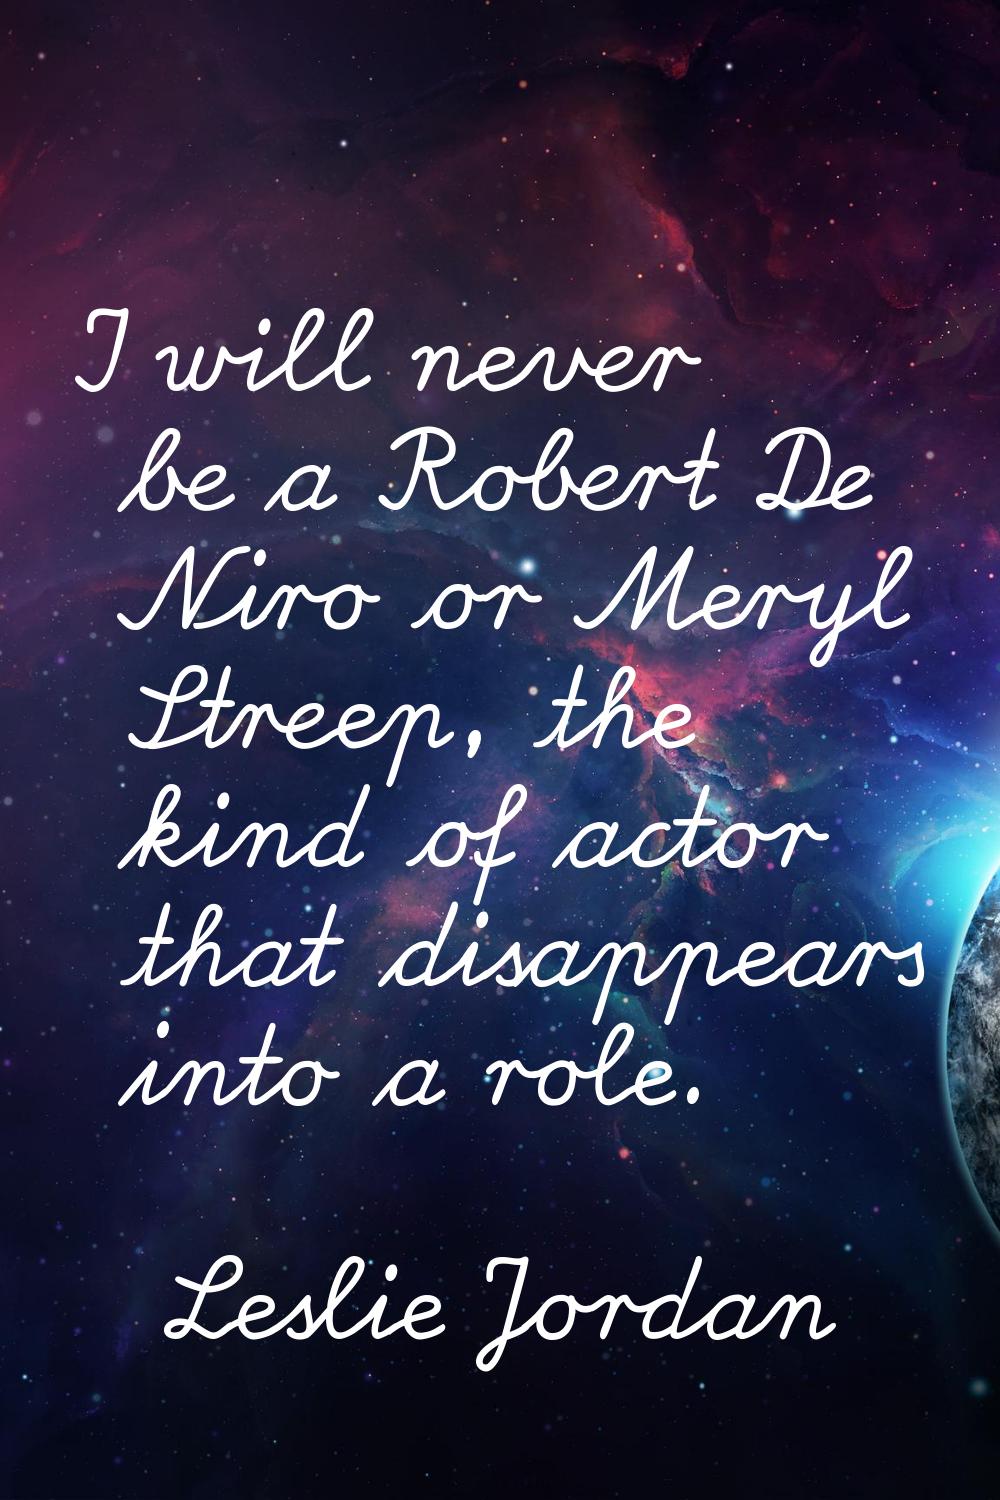 I will never be a Robert De Niro or Meryl Streep, the kind of actor that disappears into a role.